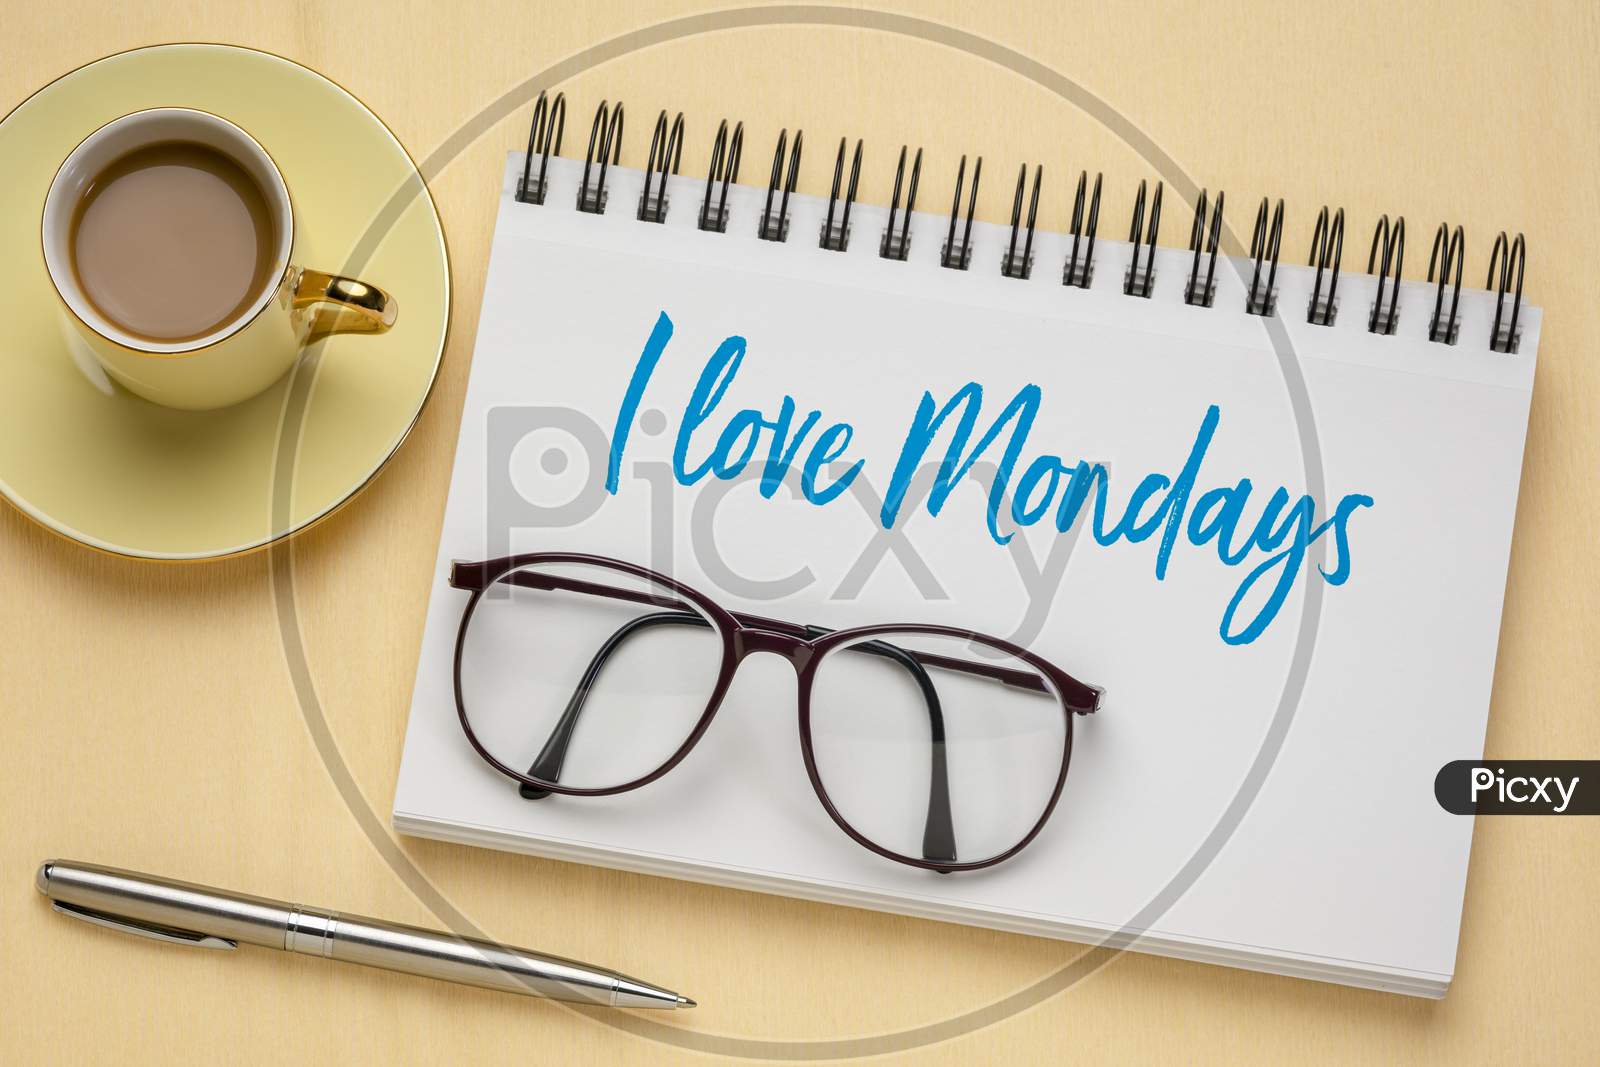 I Love Mondays - Handwriting  In A Sketchbook With A Cup Of Coffee, Positive Attitude And Mindset Concept